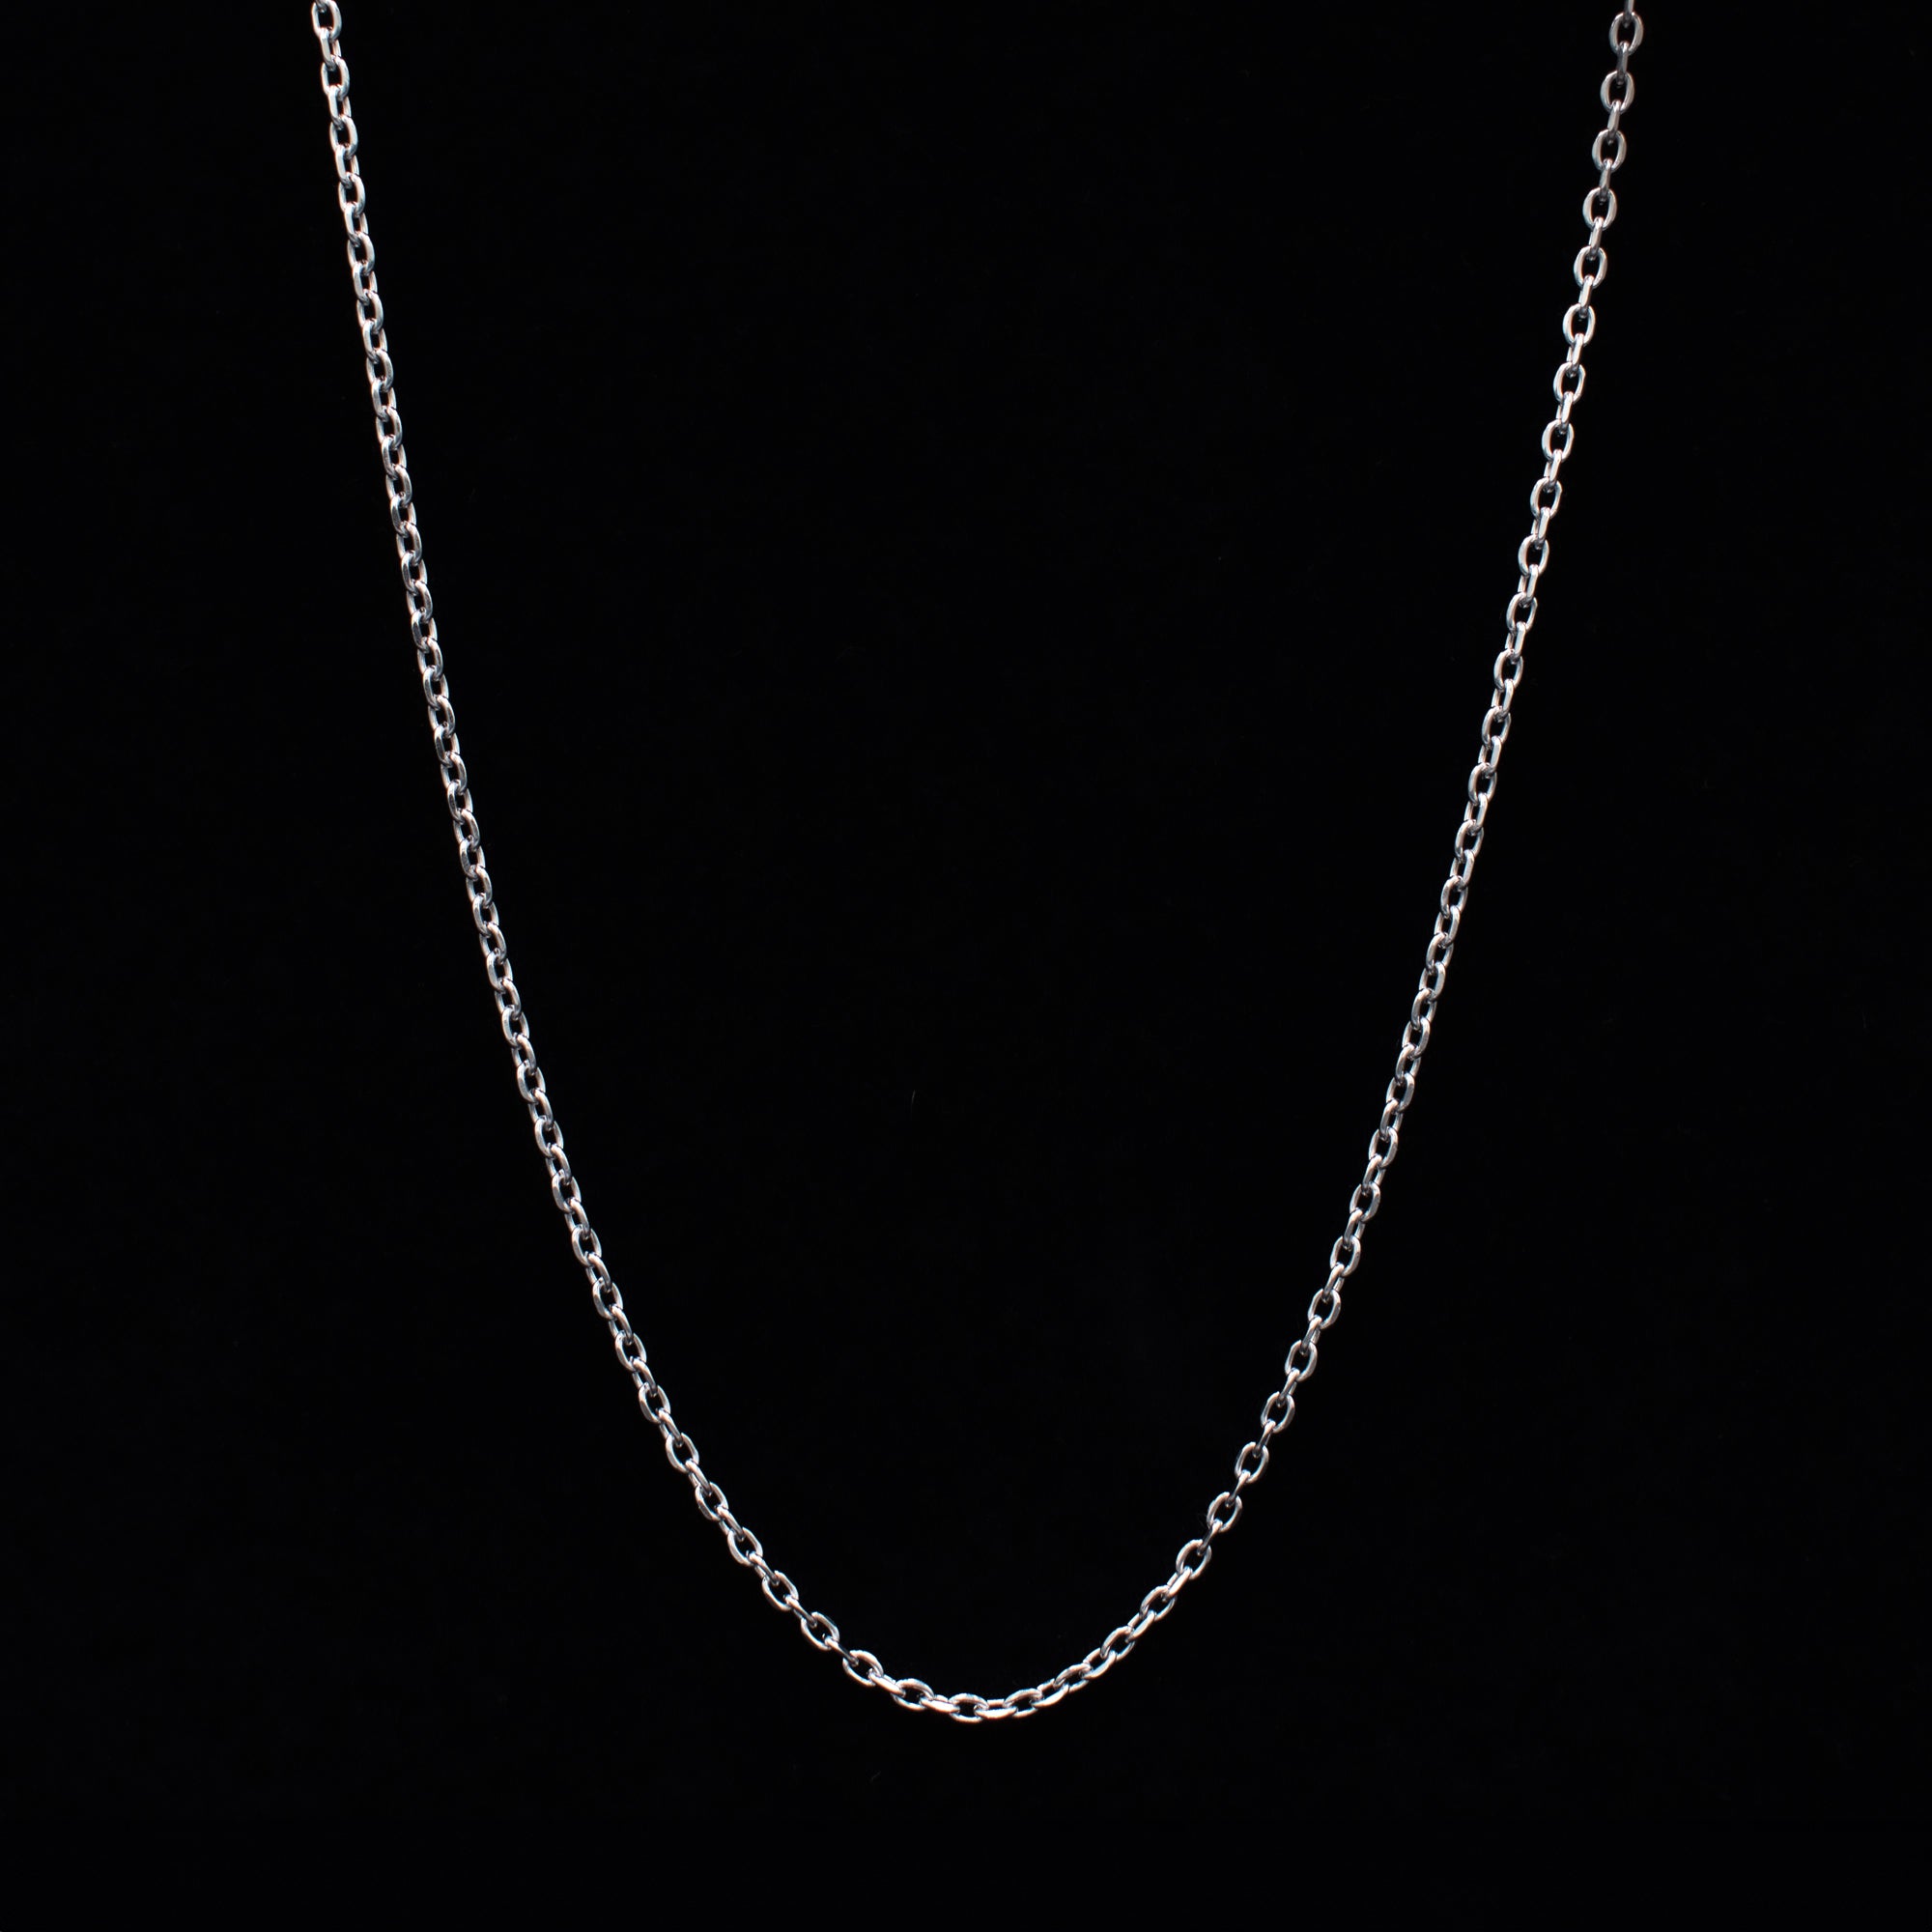 Cable Chain Necklace - (Silver) 3mm